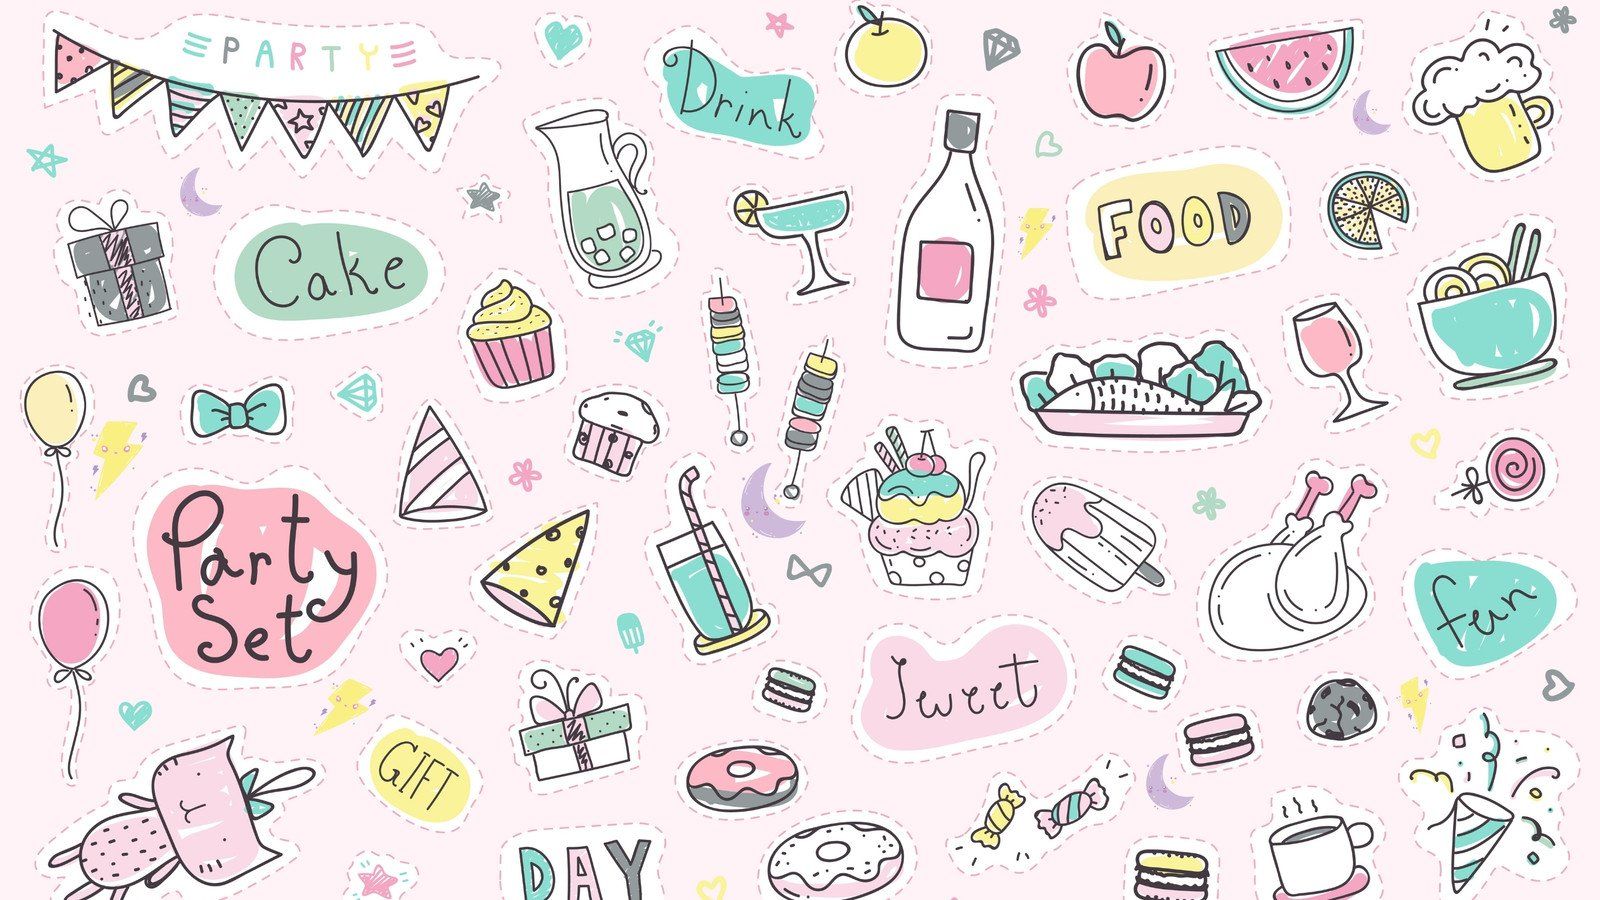 A pastel colored pattern of stickers with food, drinks, and party elements. - Kawaii